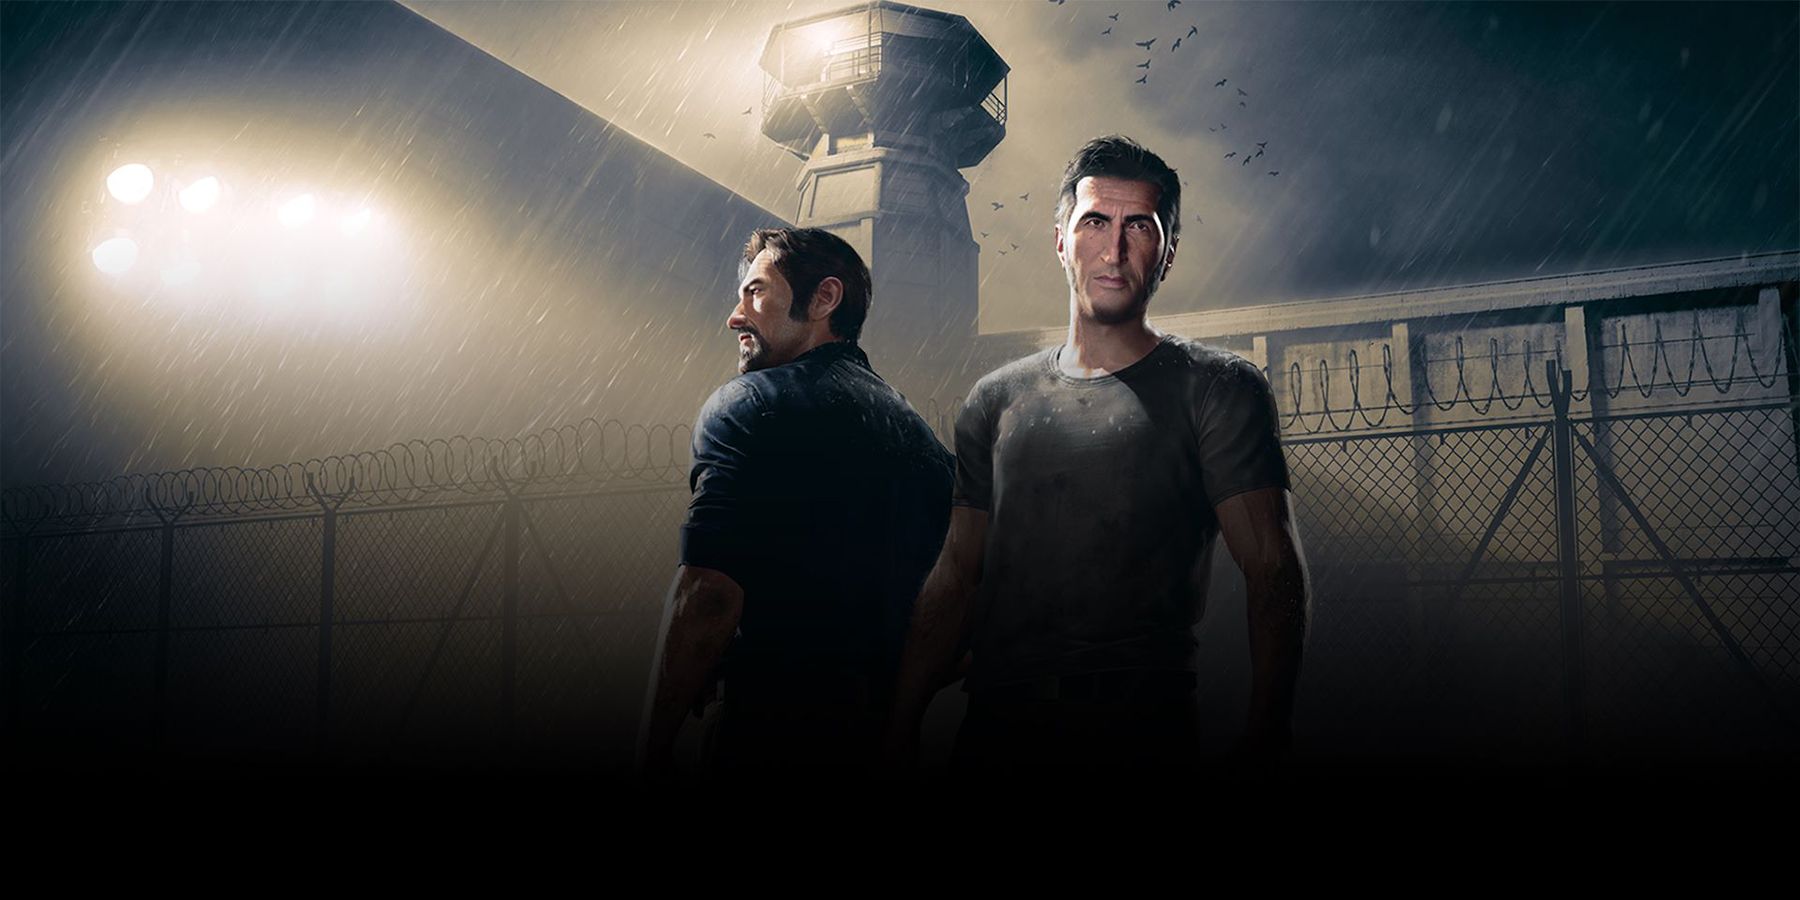 The main characters of A Way Out stand in front of a prison guard tower